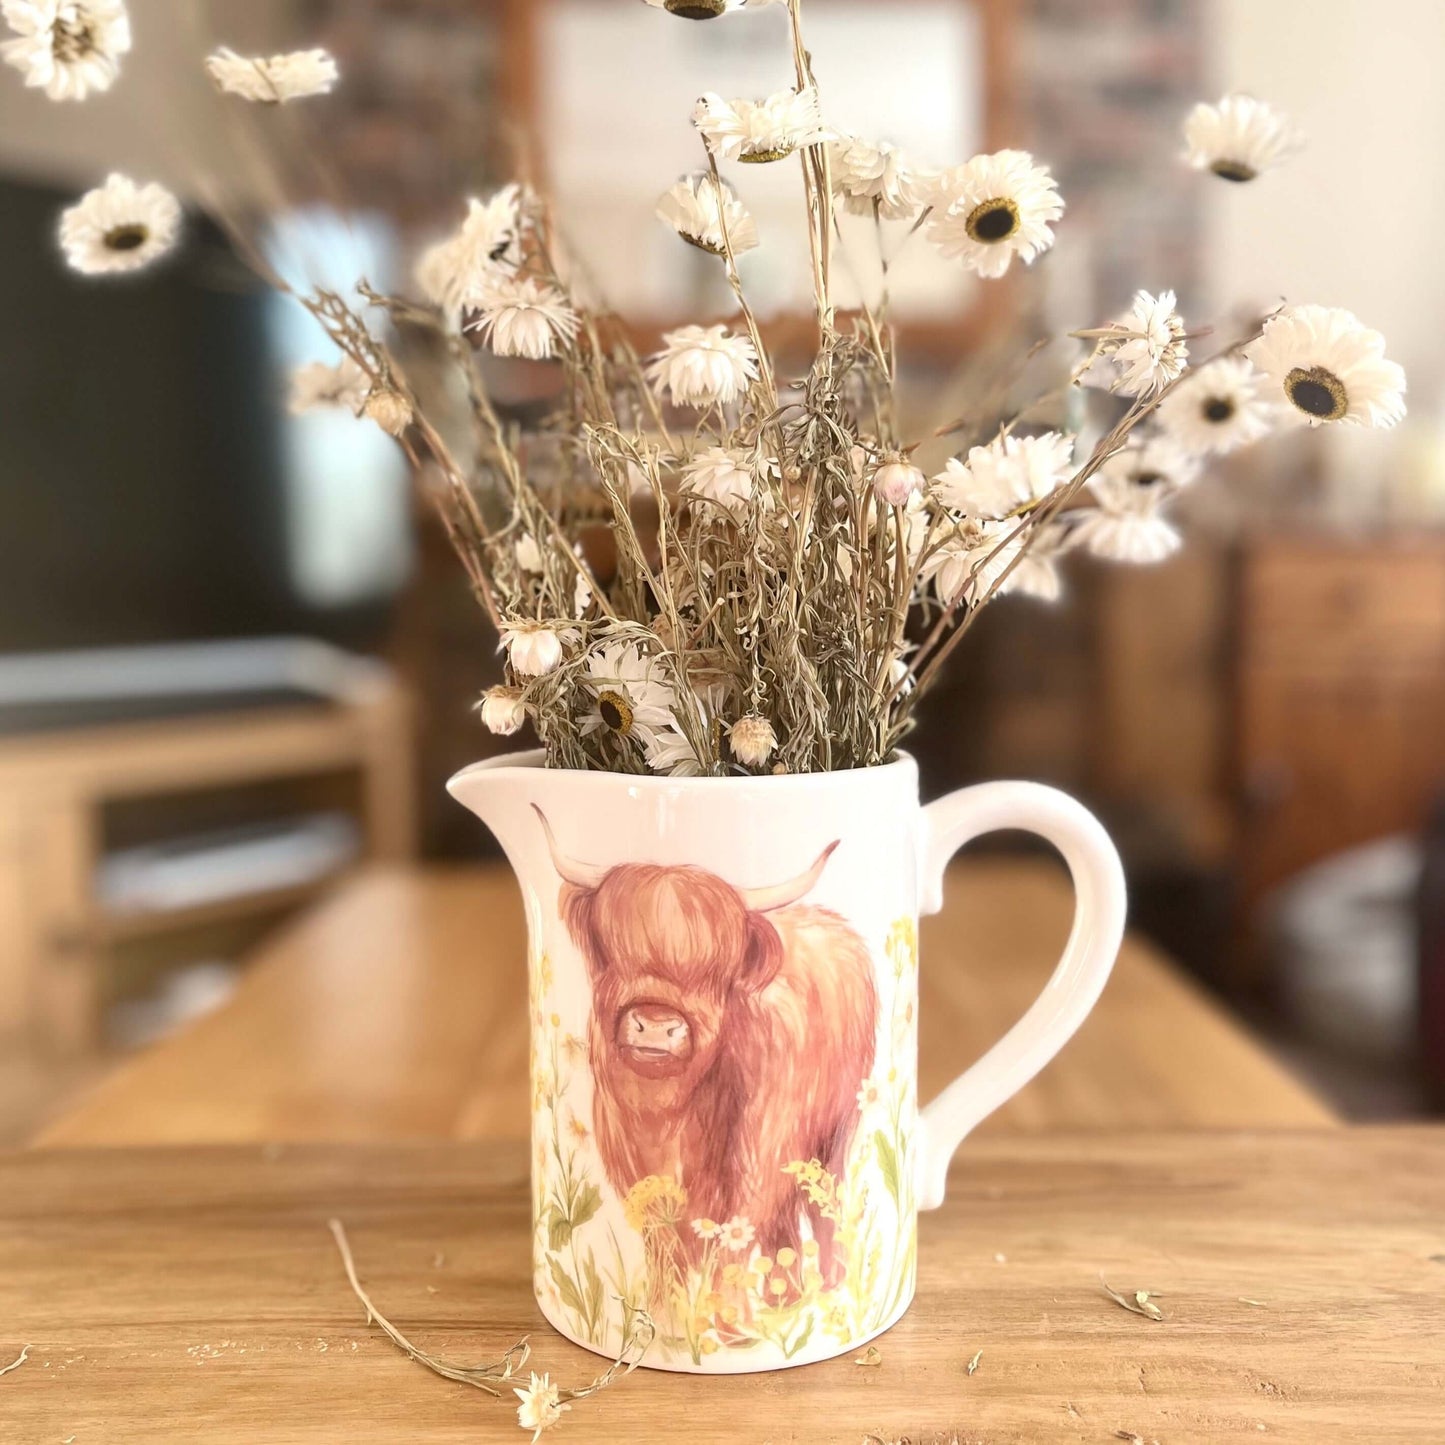 Spring Highland Cow Jug With Dried Flowers Blurred background